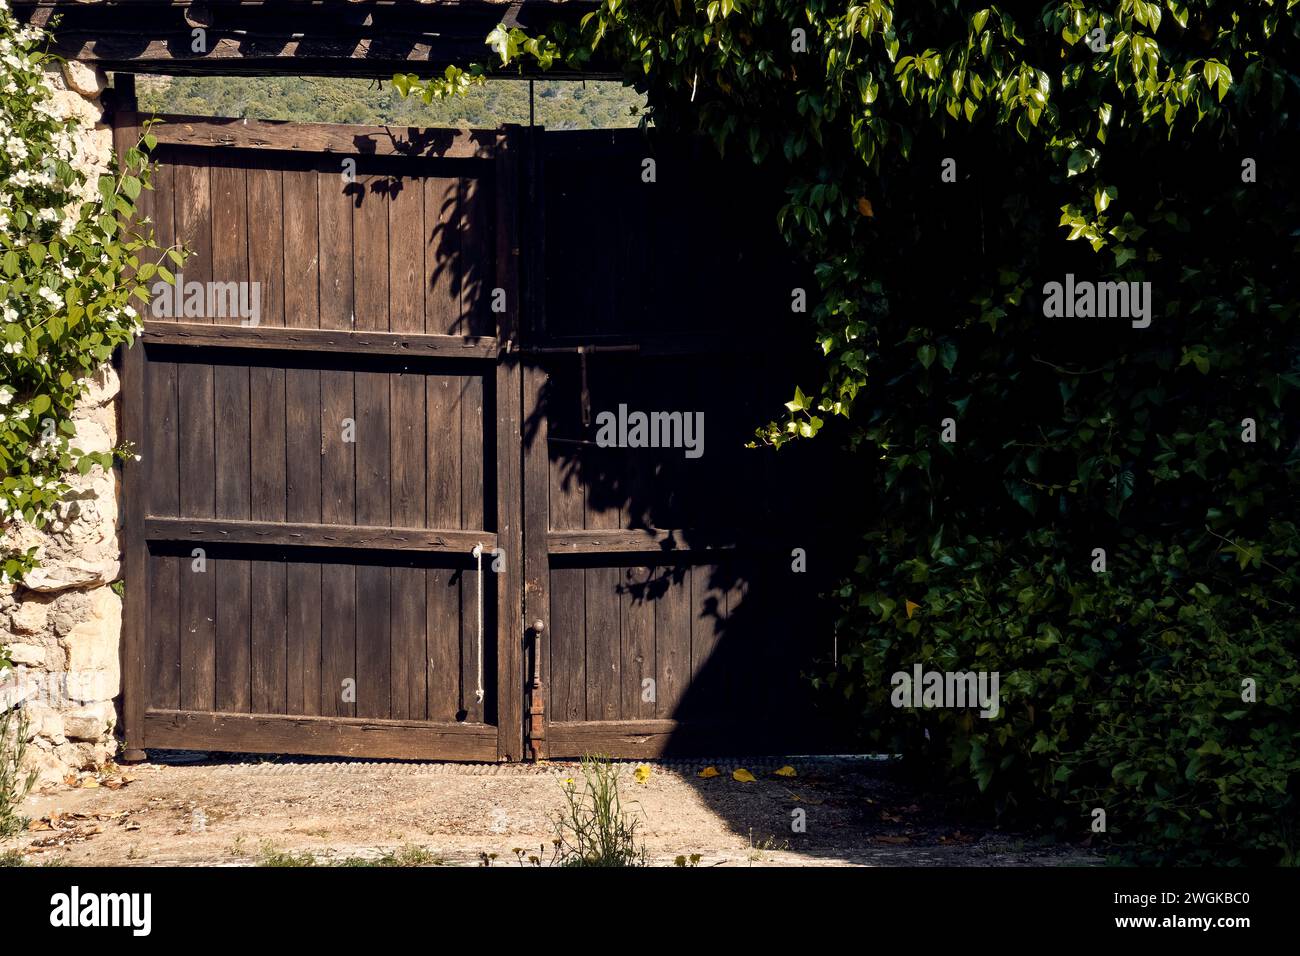 Ivy (Hedera), lilies (Iris) and celinda (Philadelphus coronarius) frame a wooden gate with a roof in the patio of a town house. Stock Photo